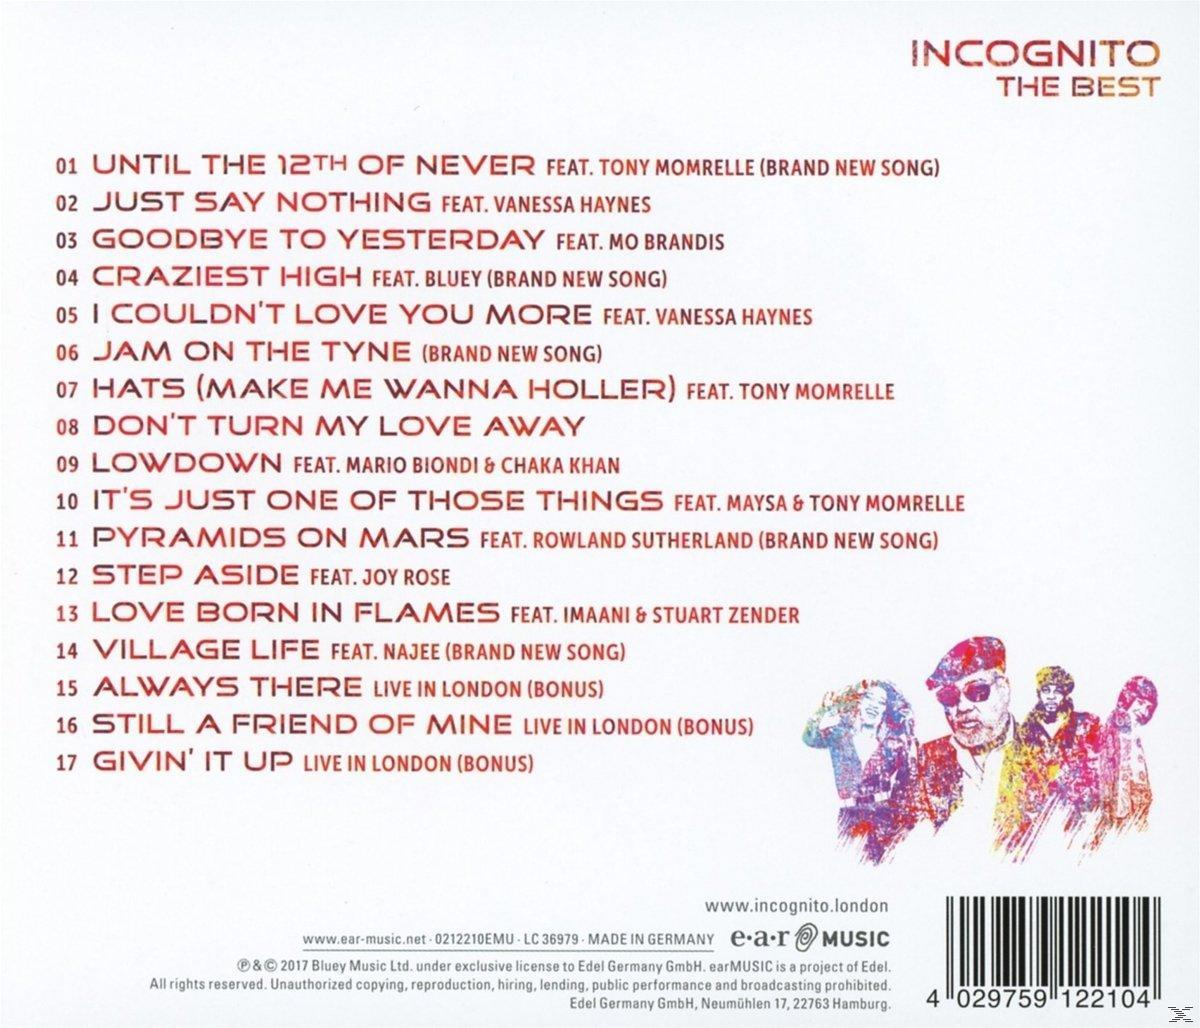 Incognito Best The (CD) - -